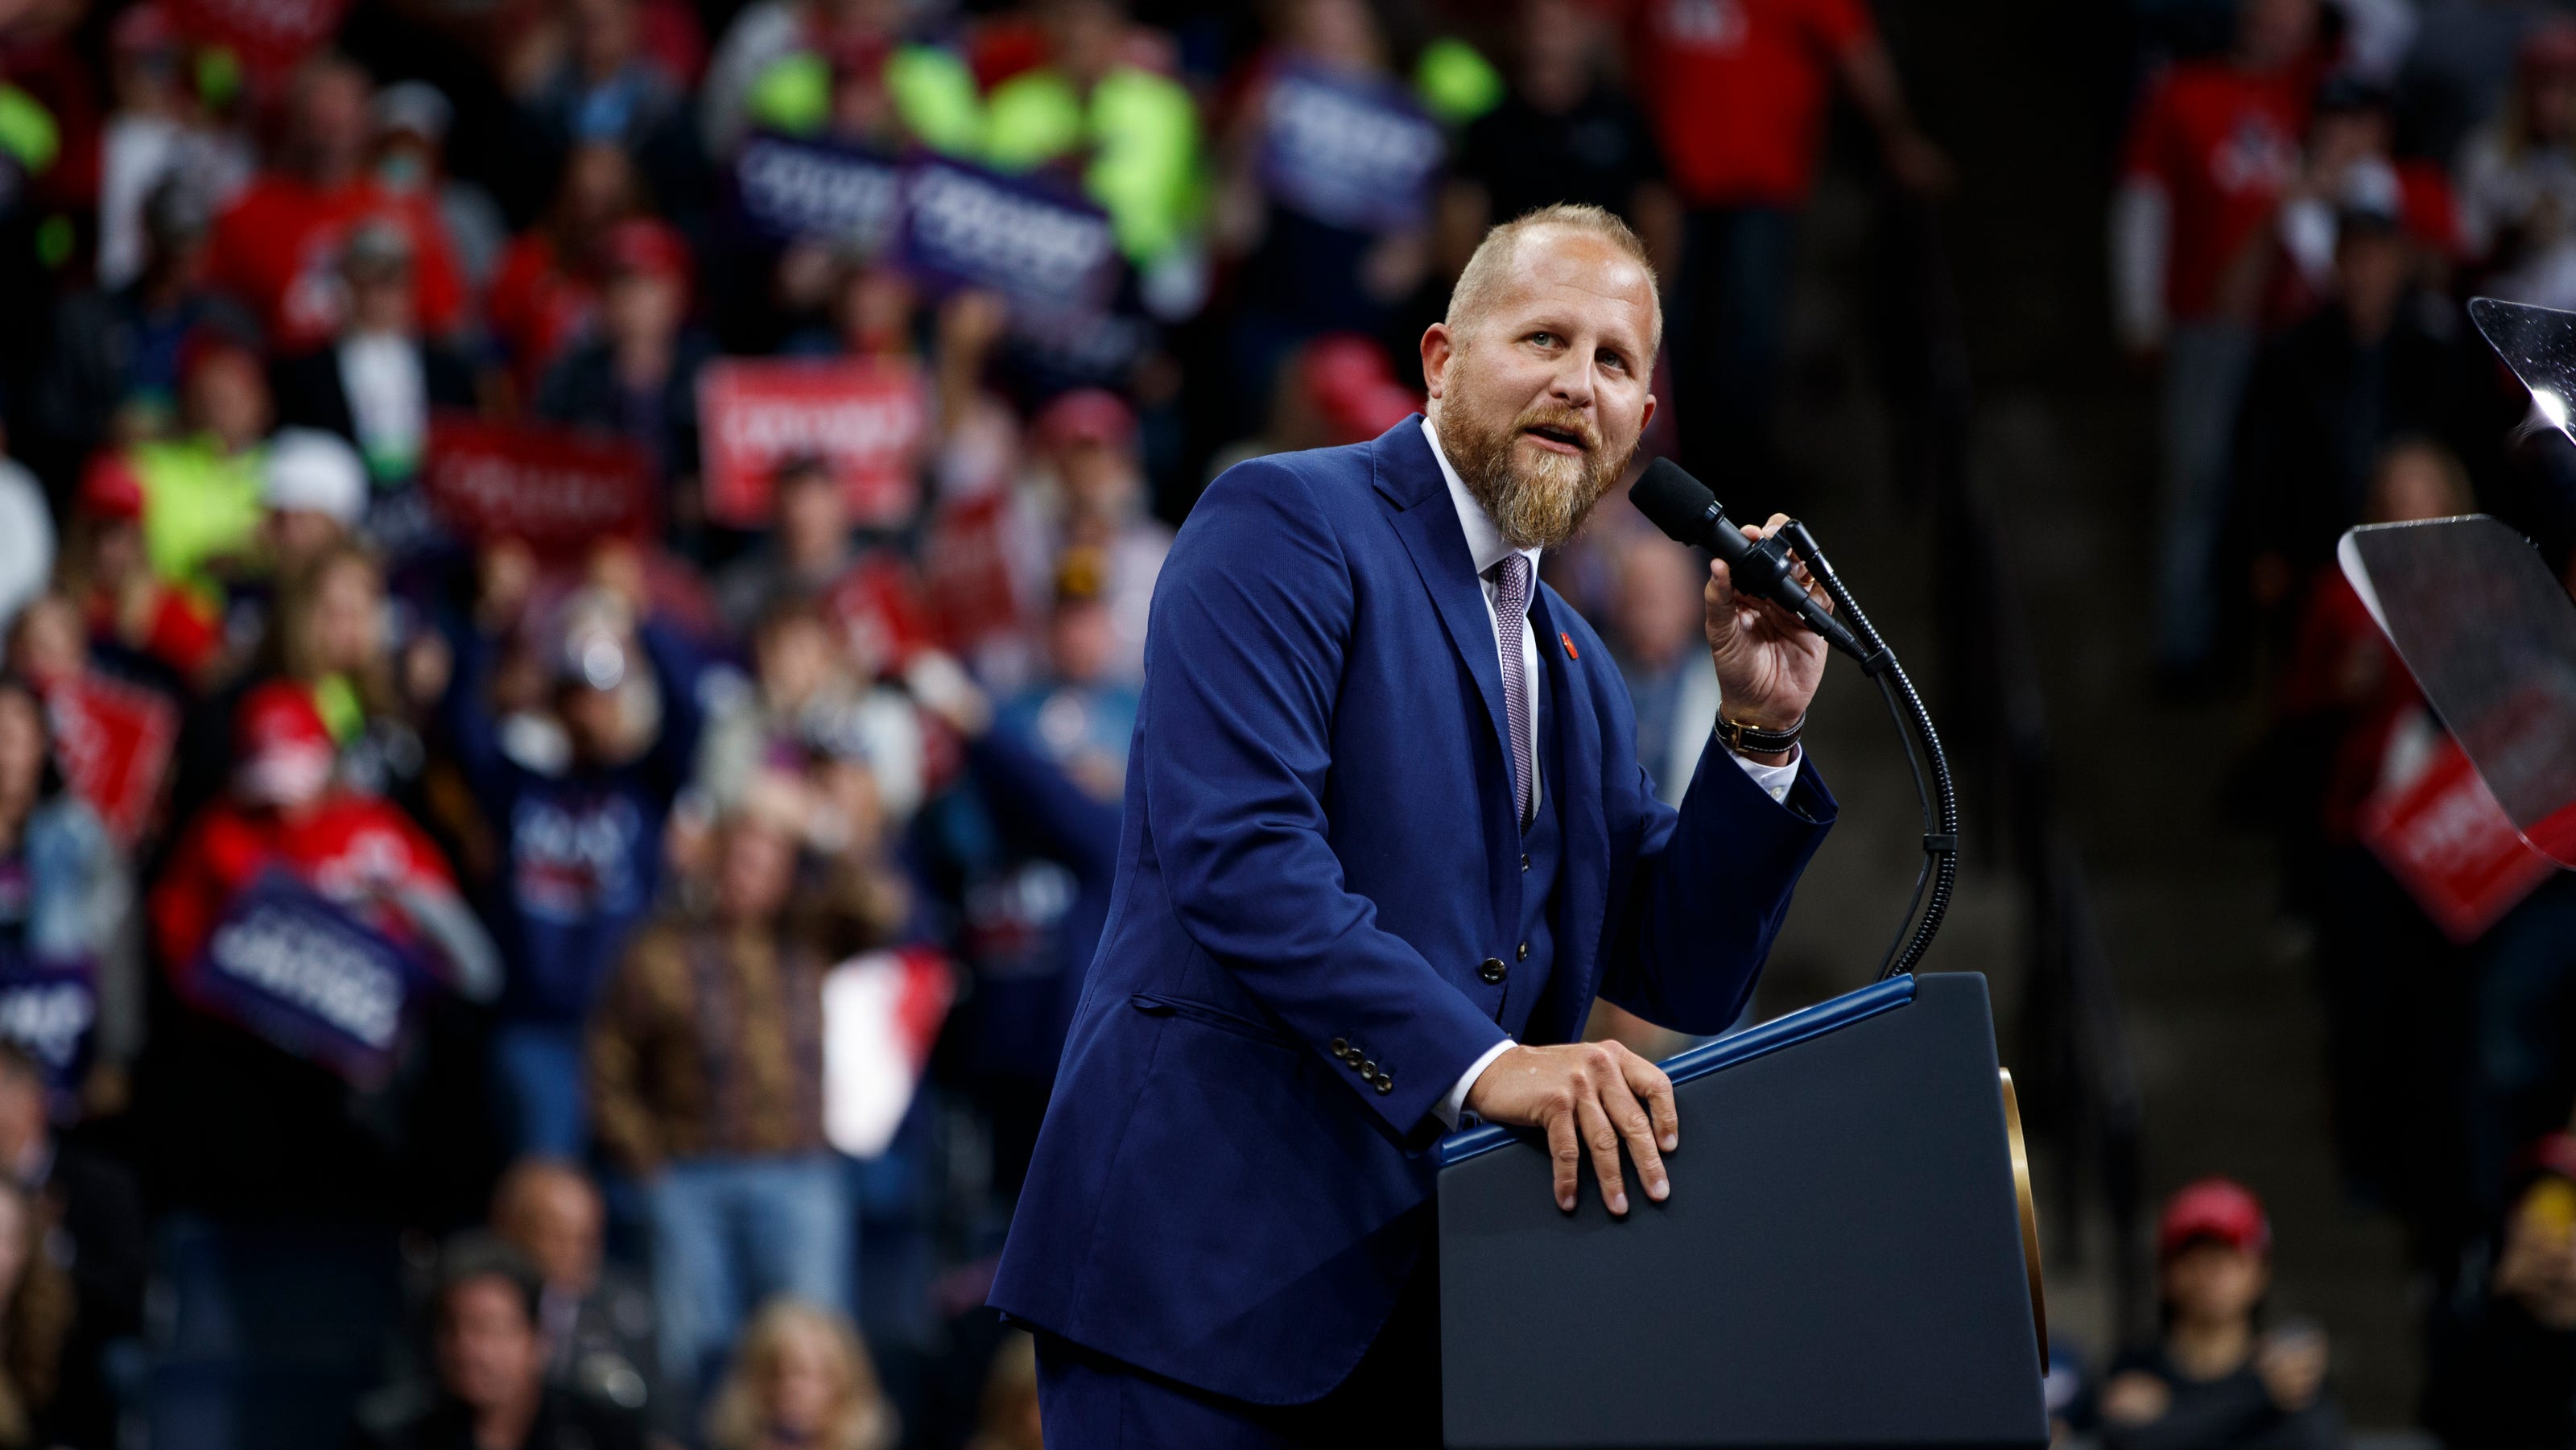 President Trump's campaign manager Brad Parscale is out